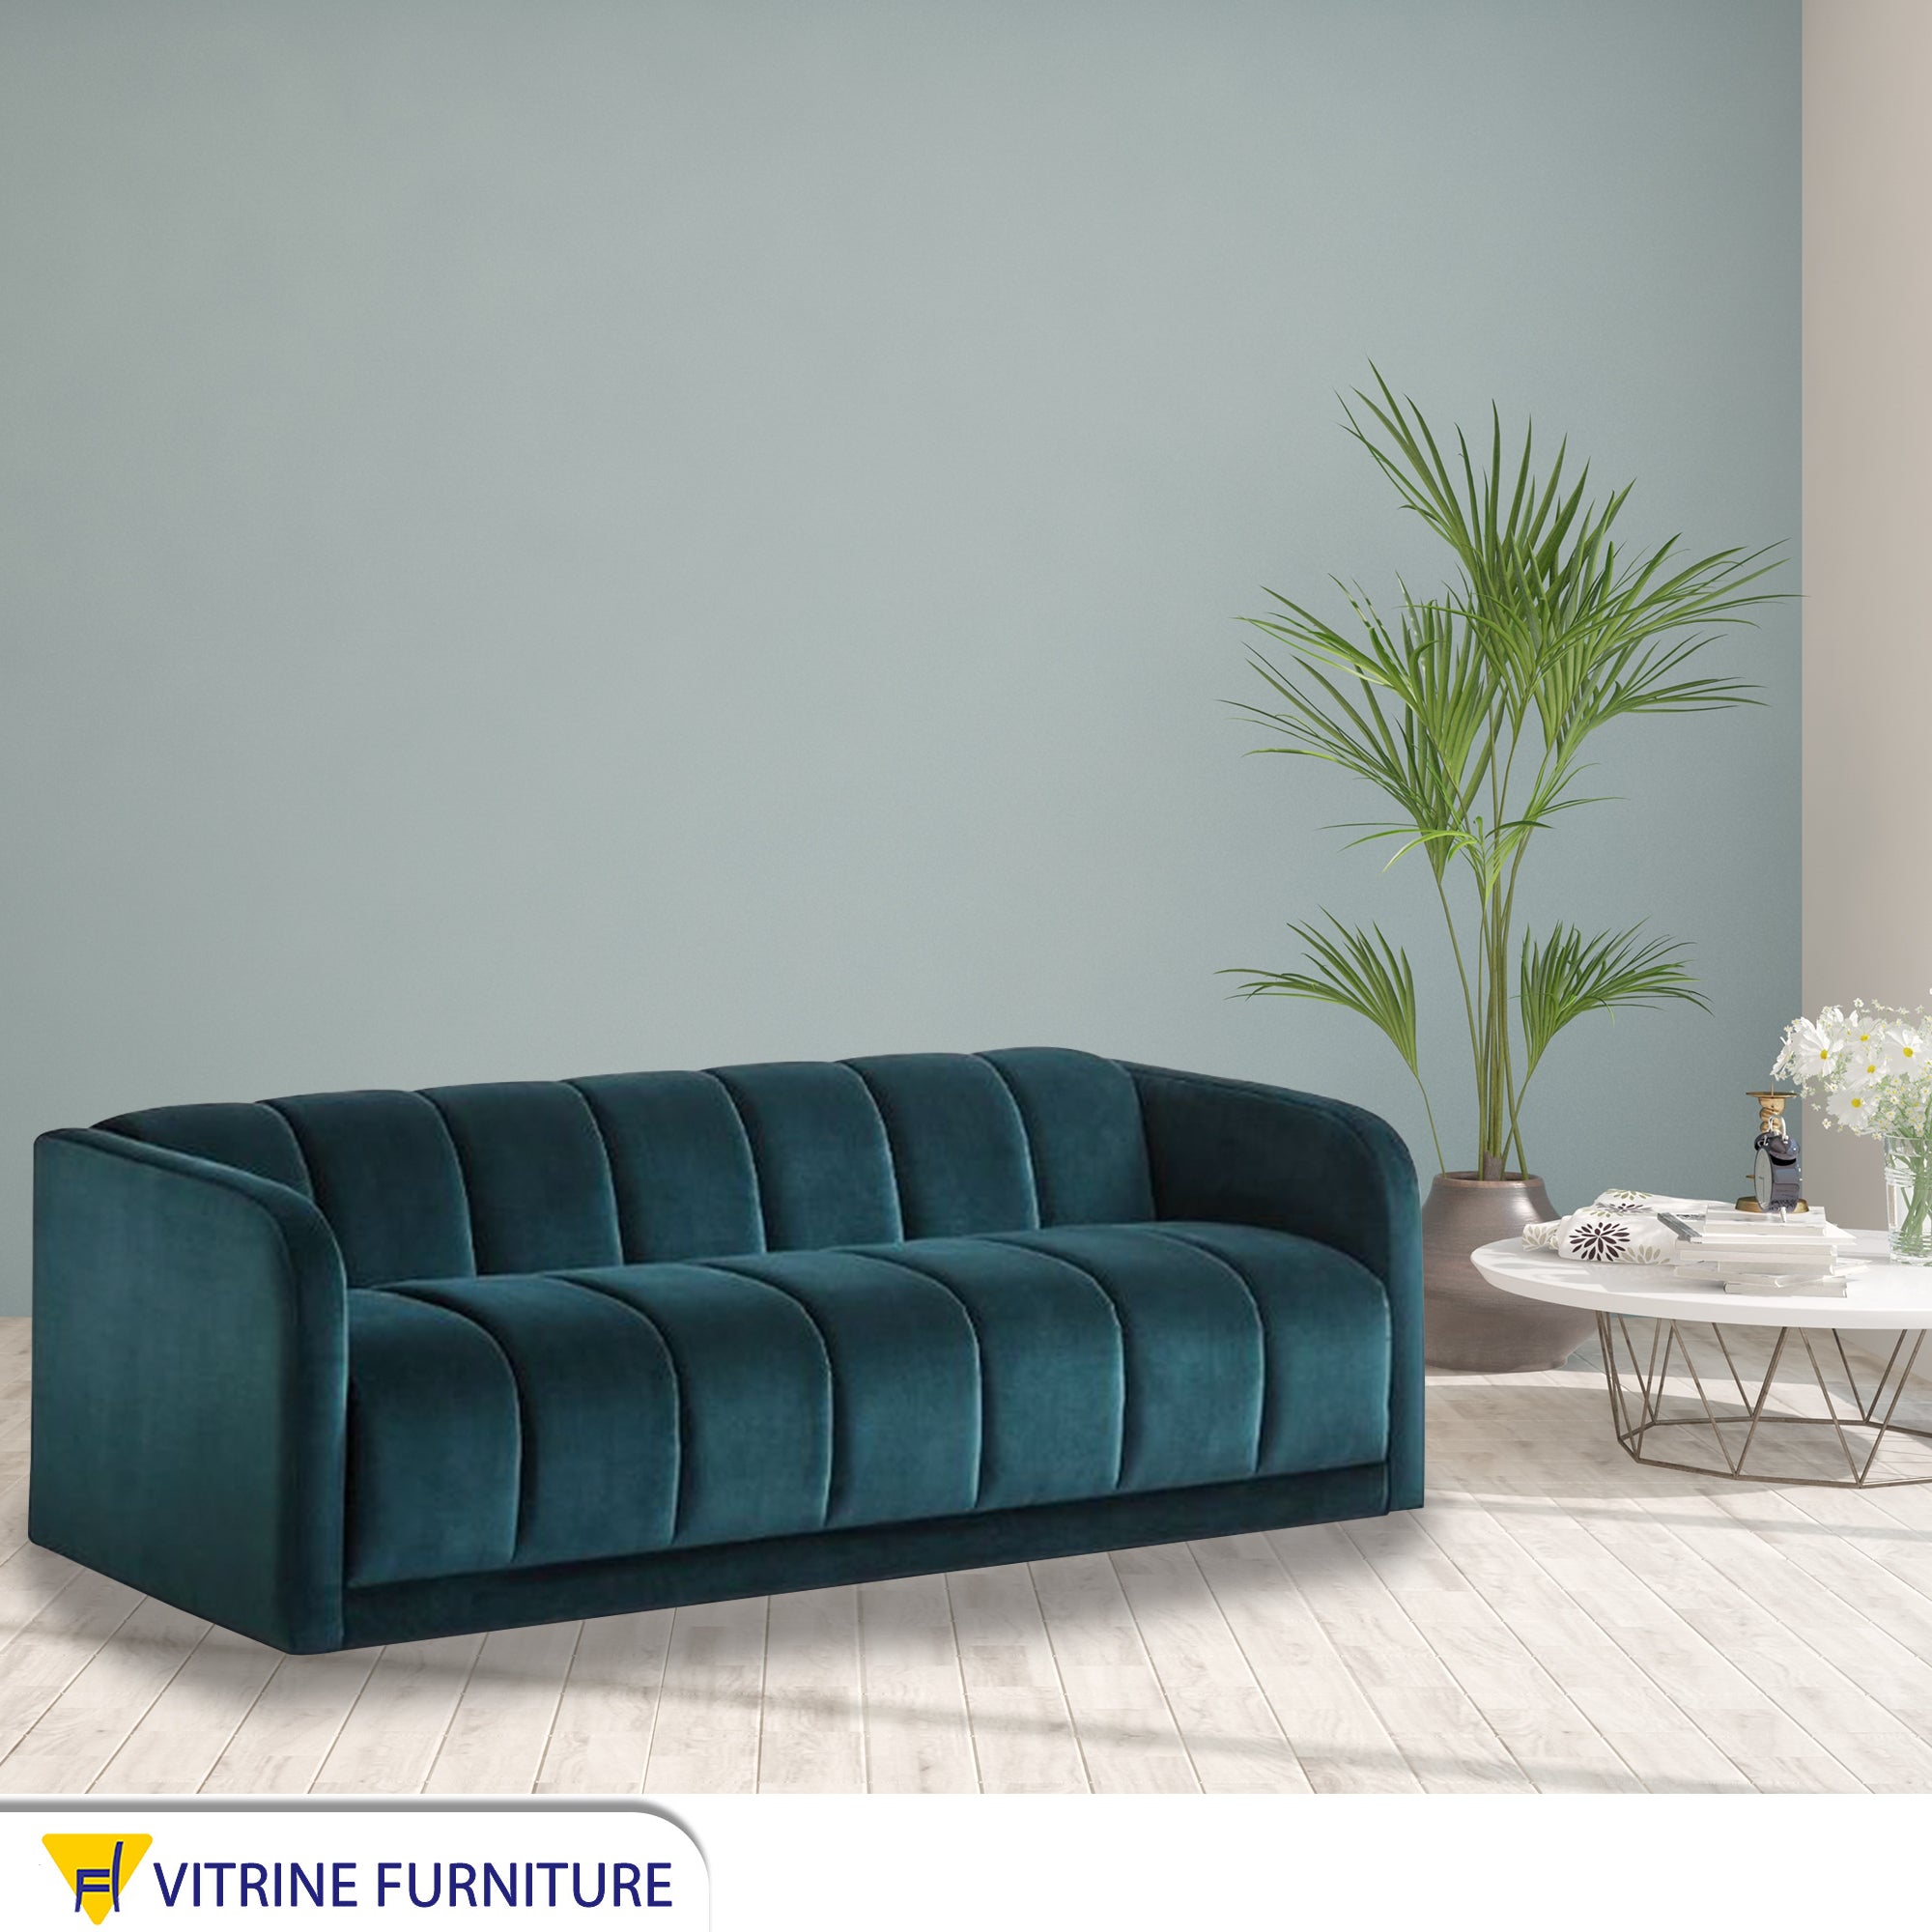 Petrol sofa with recessed lines